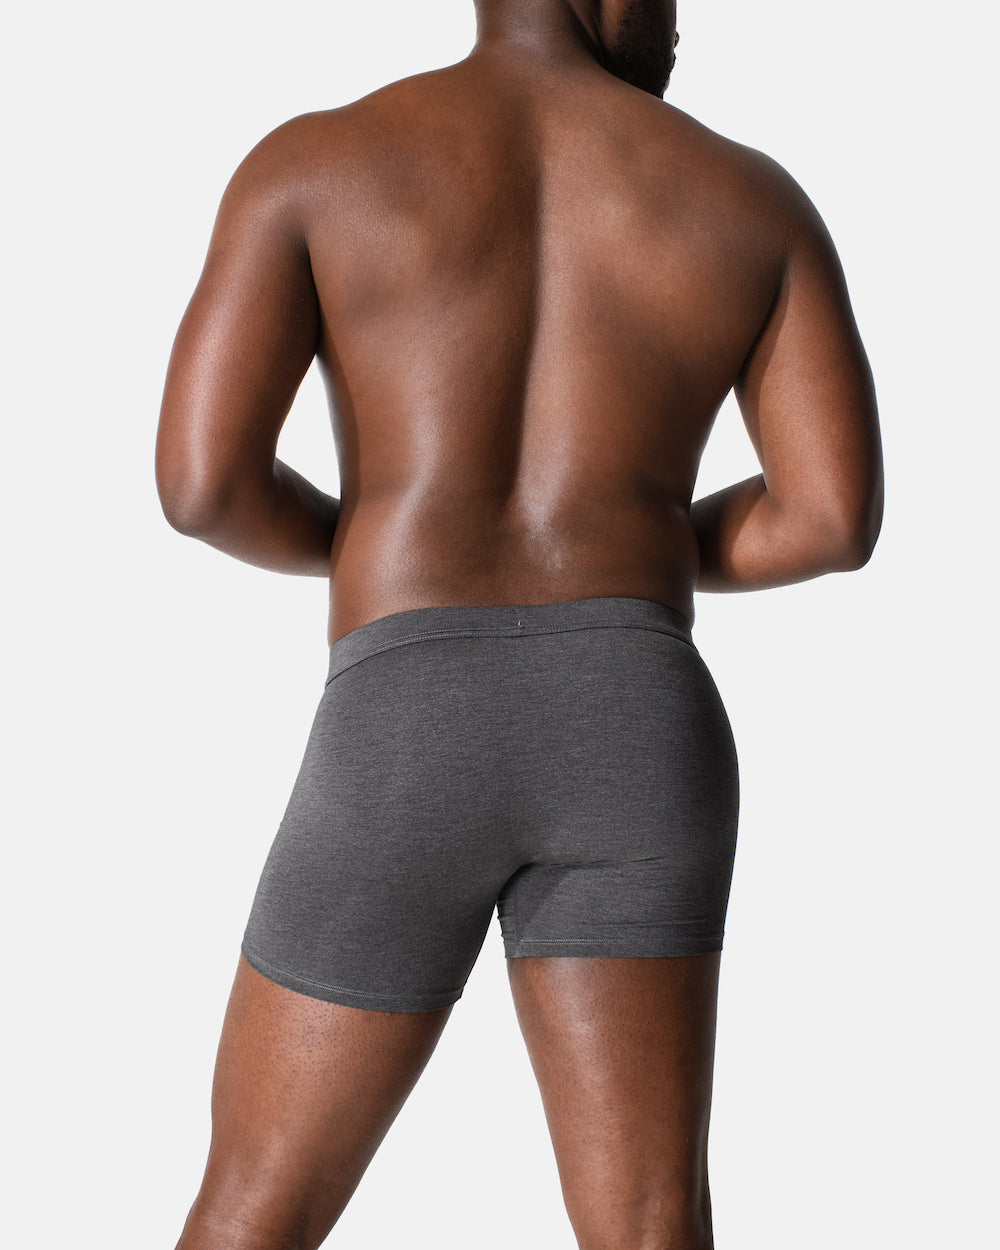 At Home Longline Trunk - Charcoal Marle